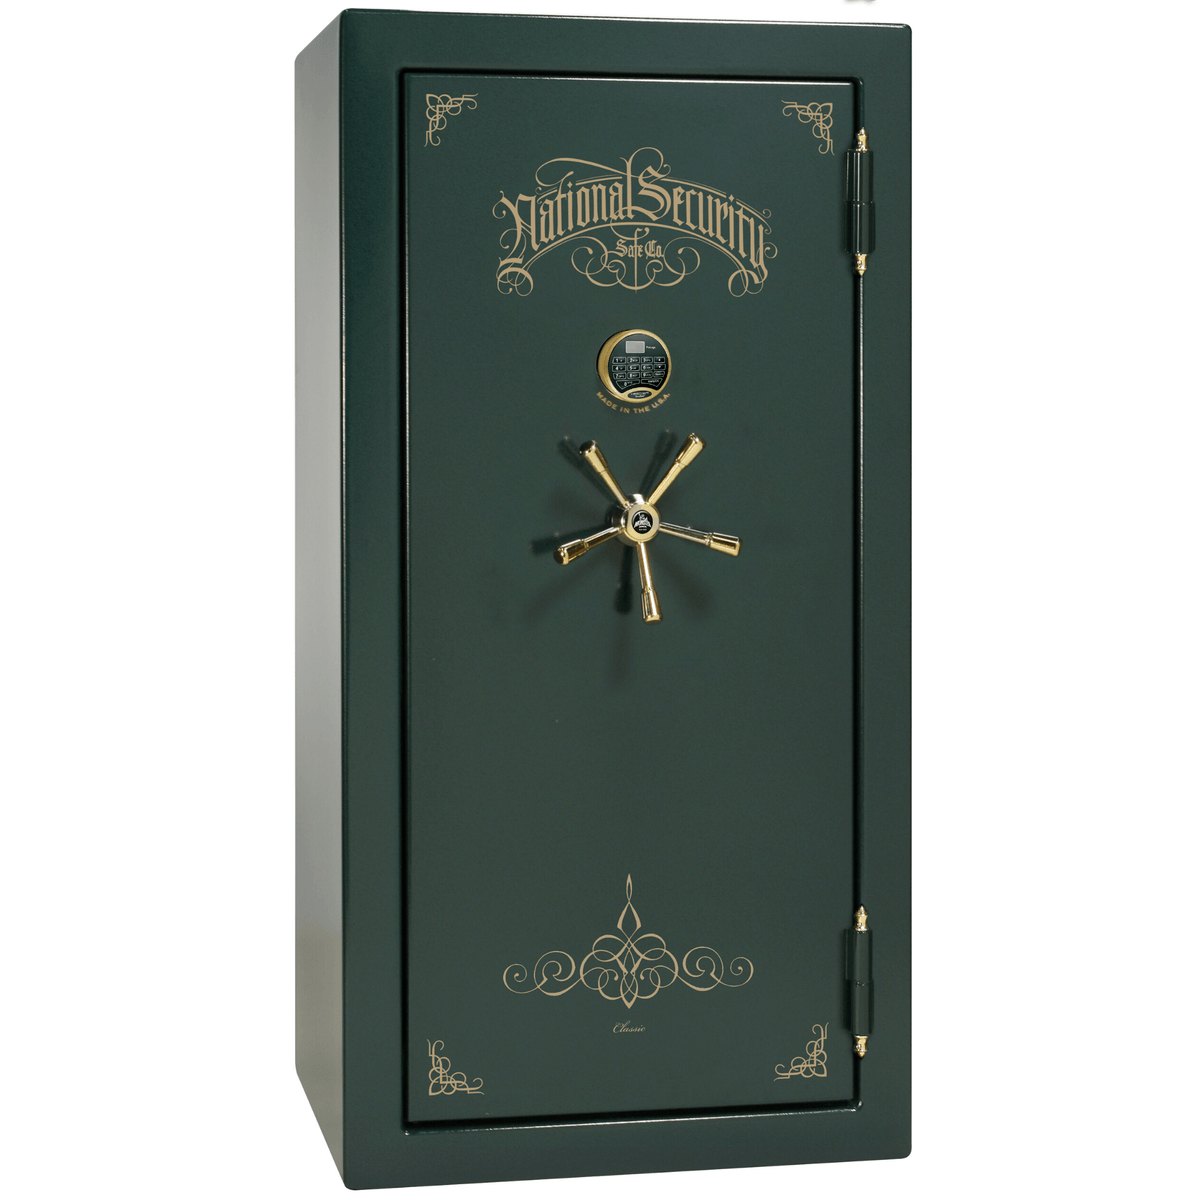 Liberty Safe Classic Plus 25 in Green Marble with Brass Electronic Lock, closed door.